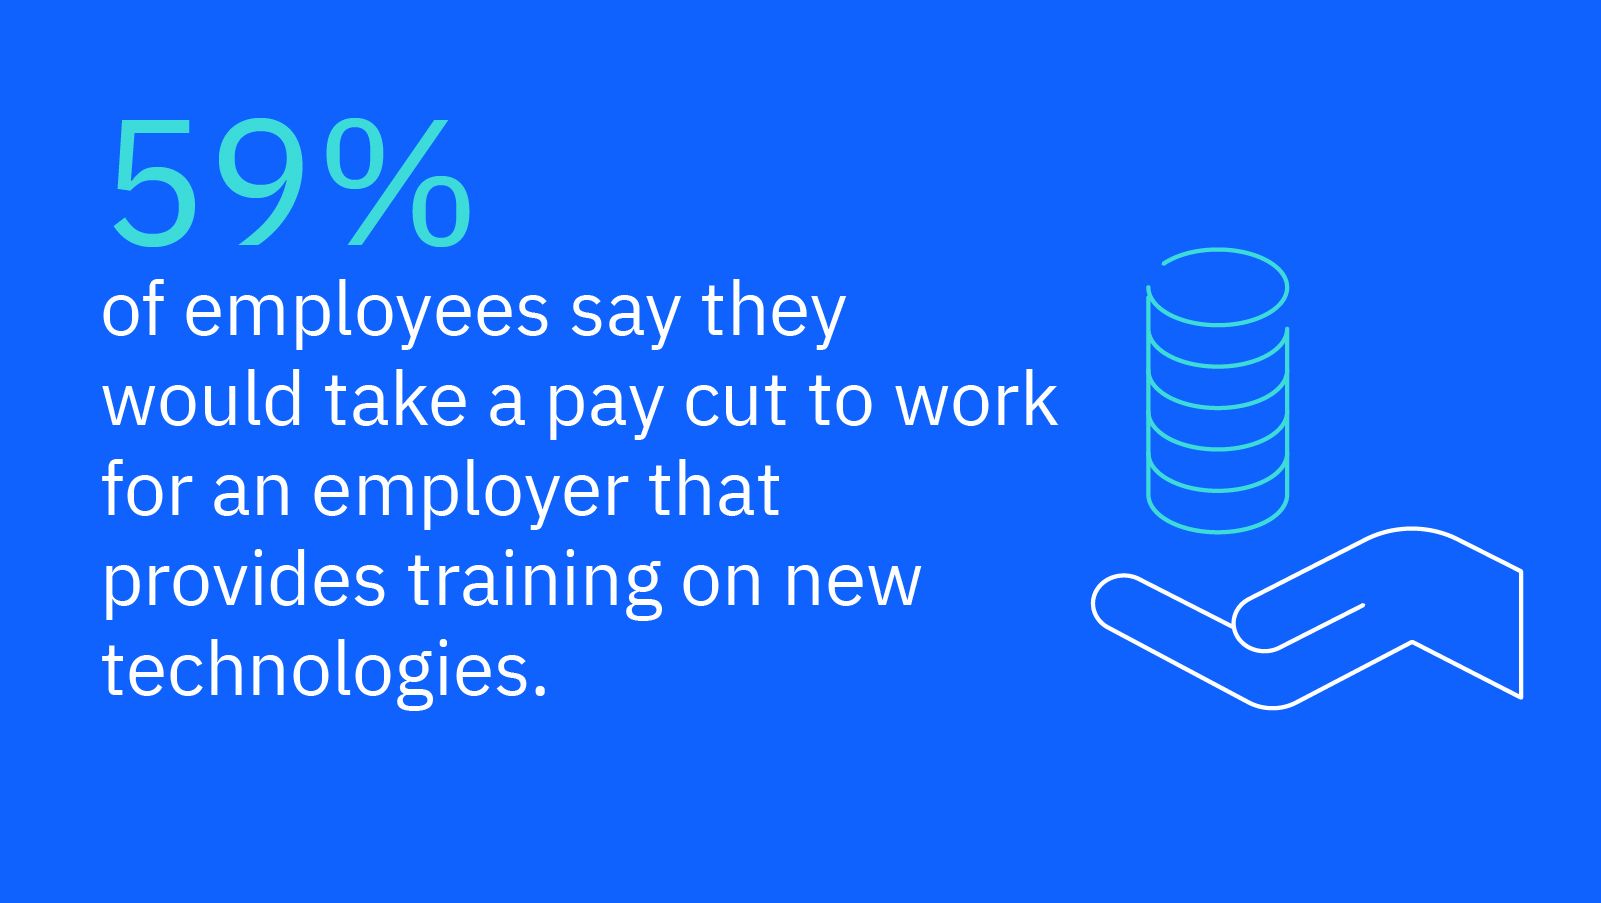 59% of consumers surveyed report they would be willing to take a pay cut to work for an employer that provides training on new technologies.